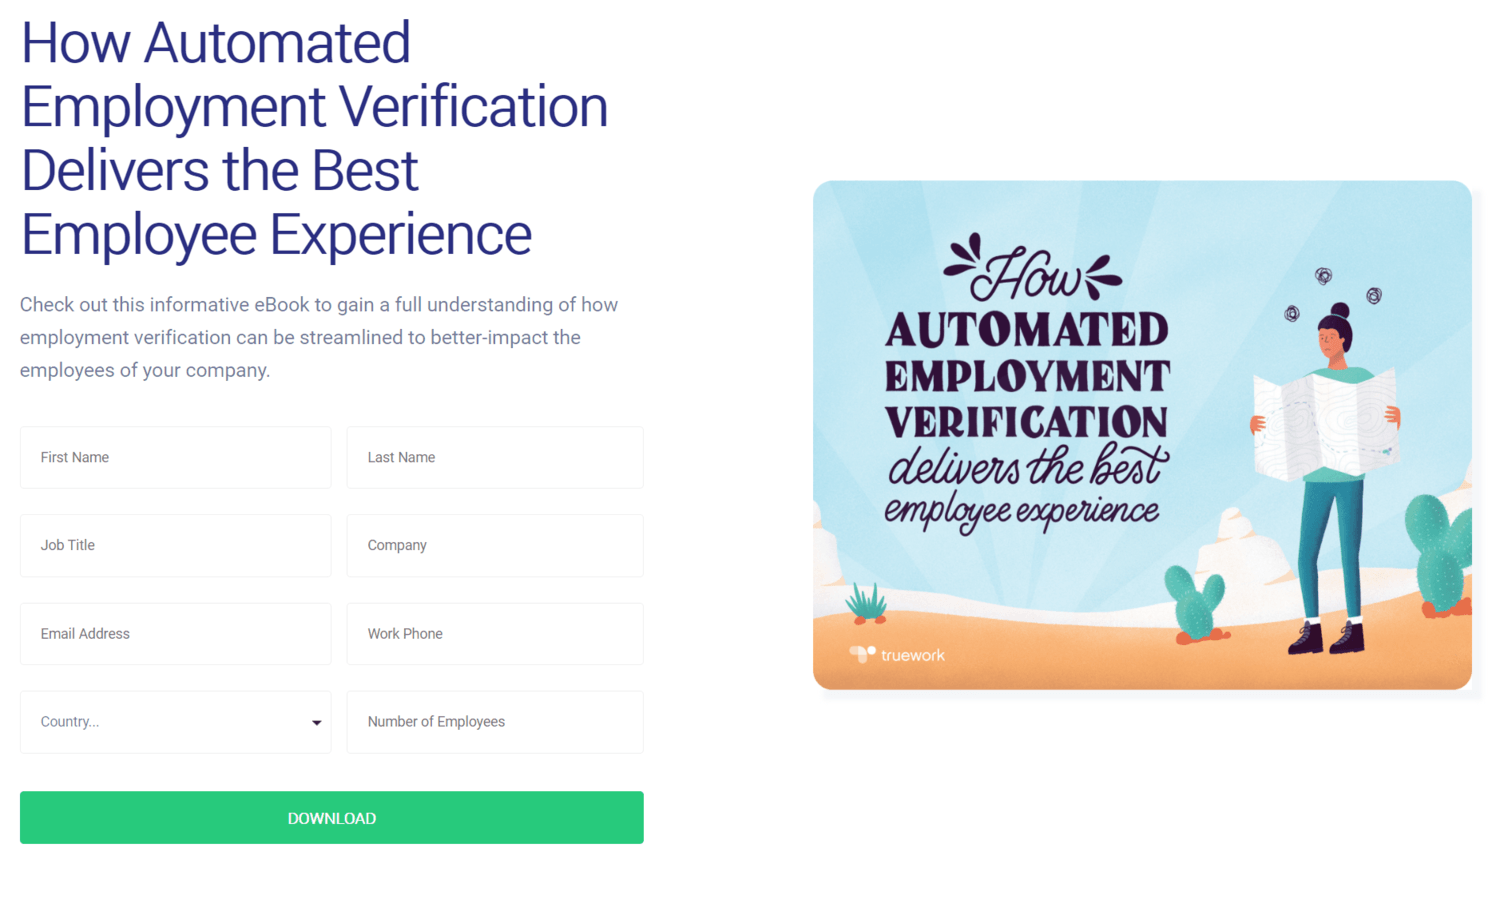 A screenshot of a landing page with a form to access an ebook on employment verification.